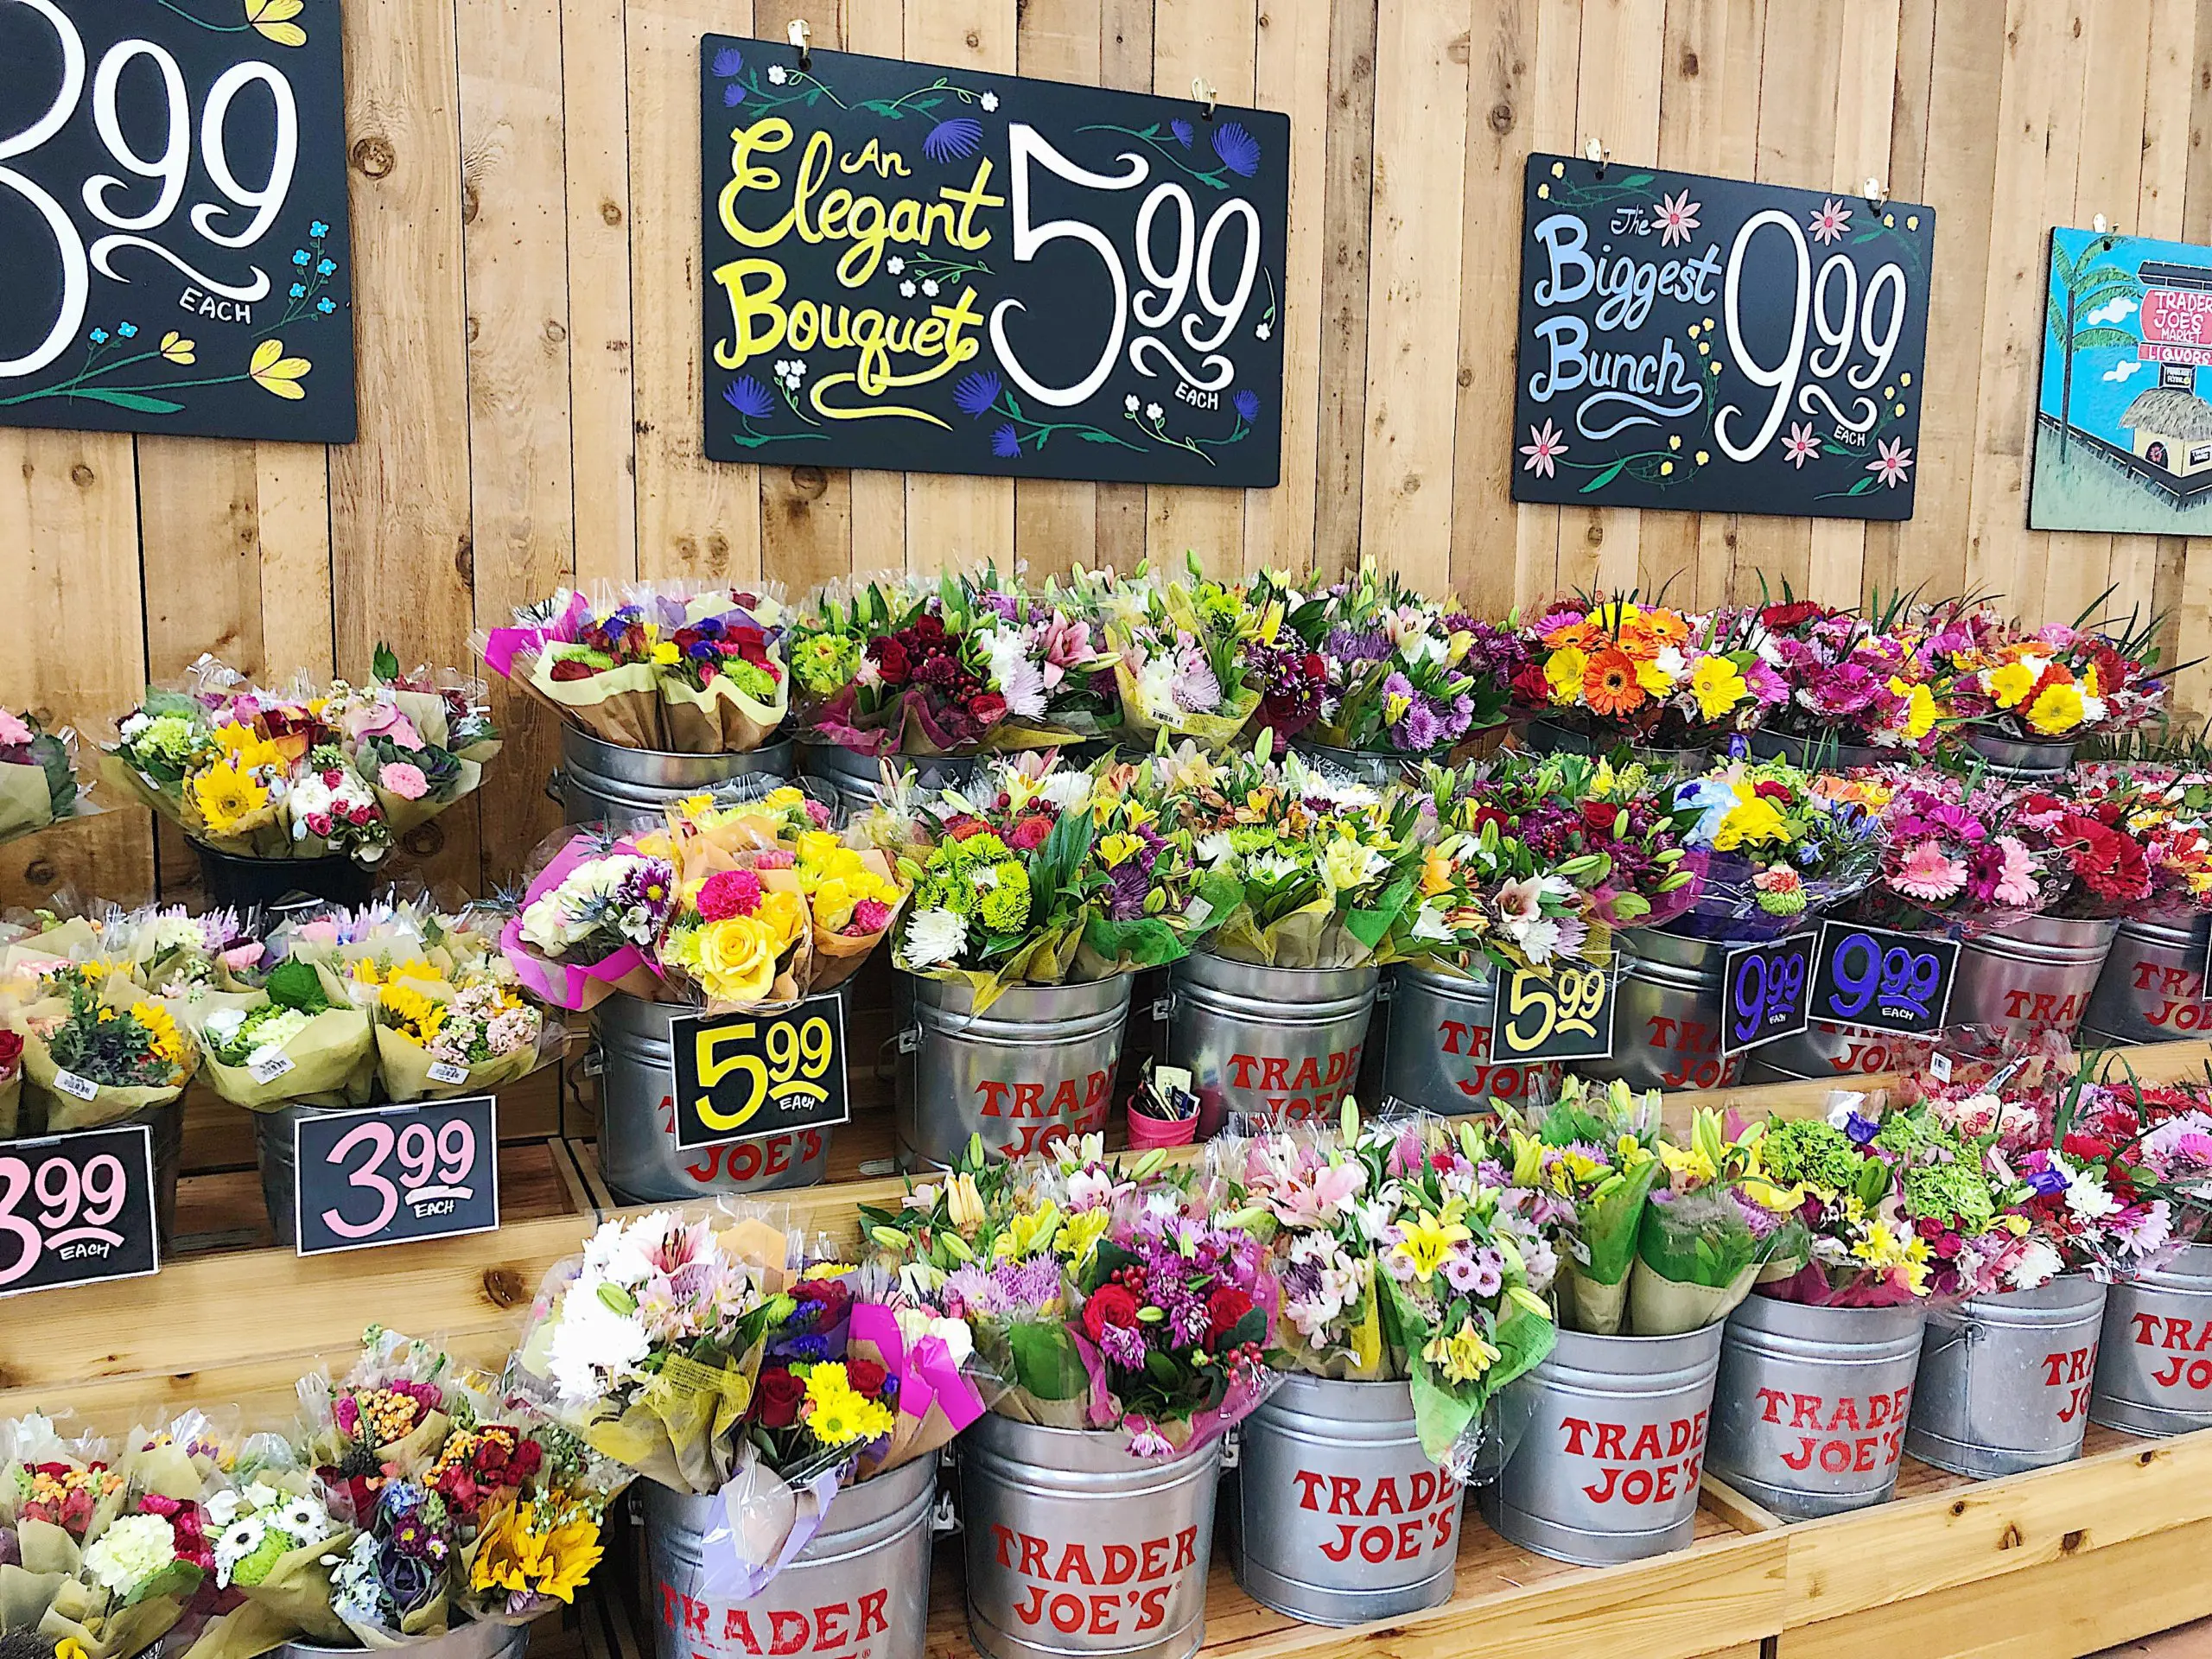 How Much Are Flowers At Trader Joe’s